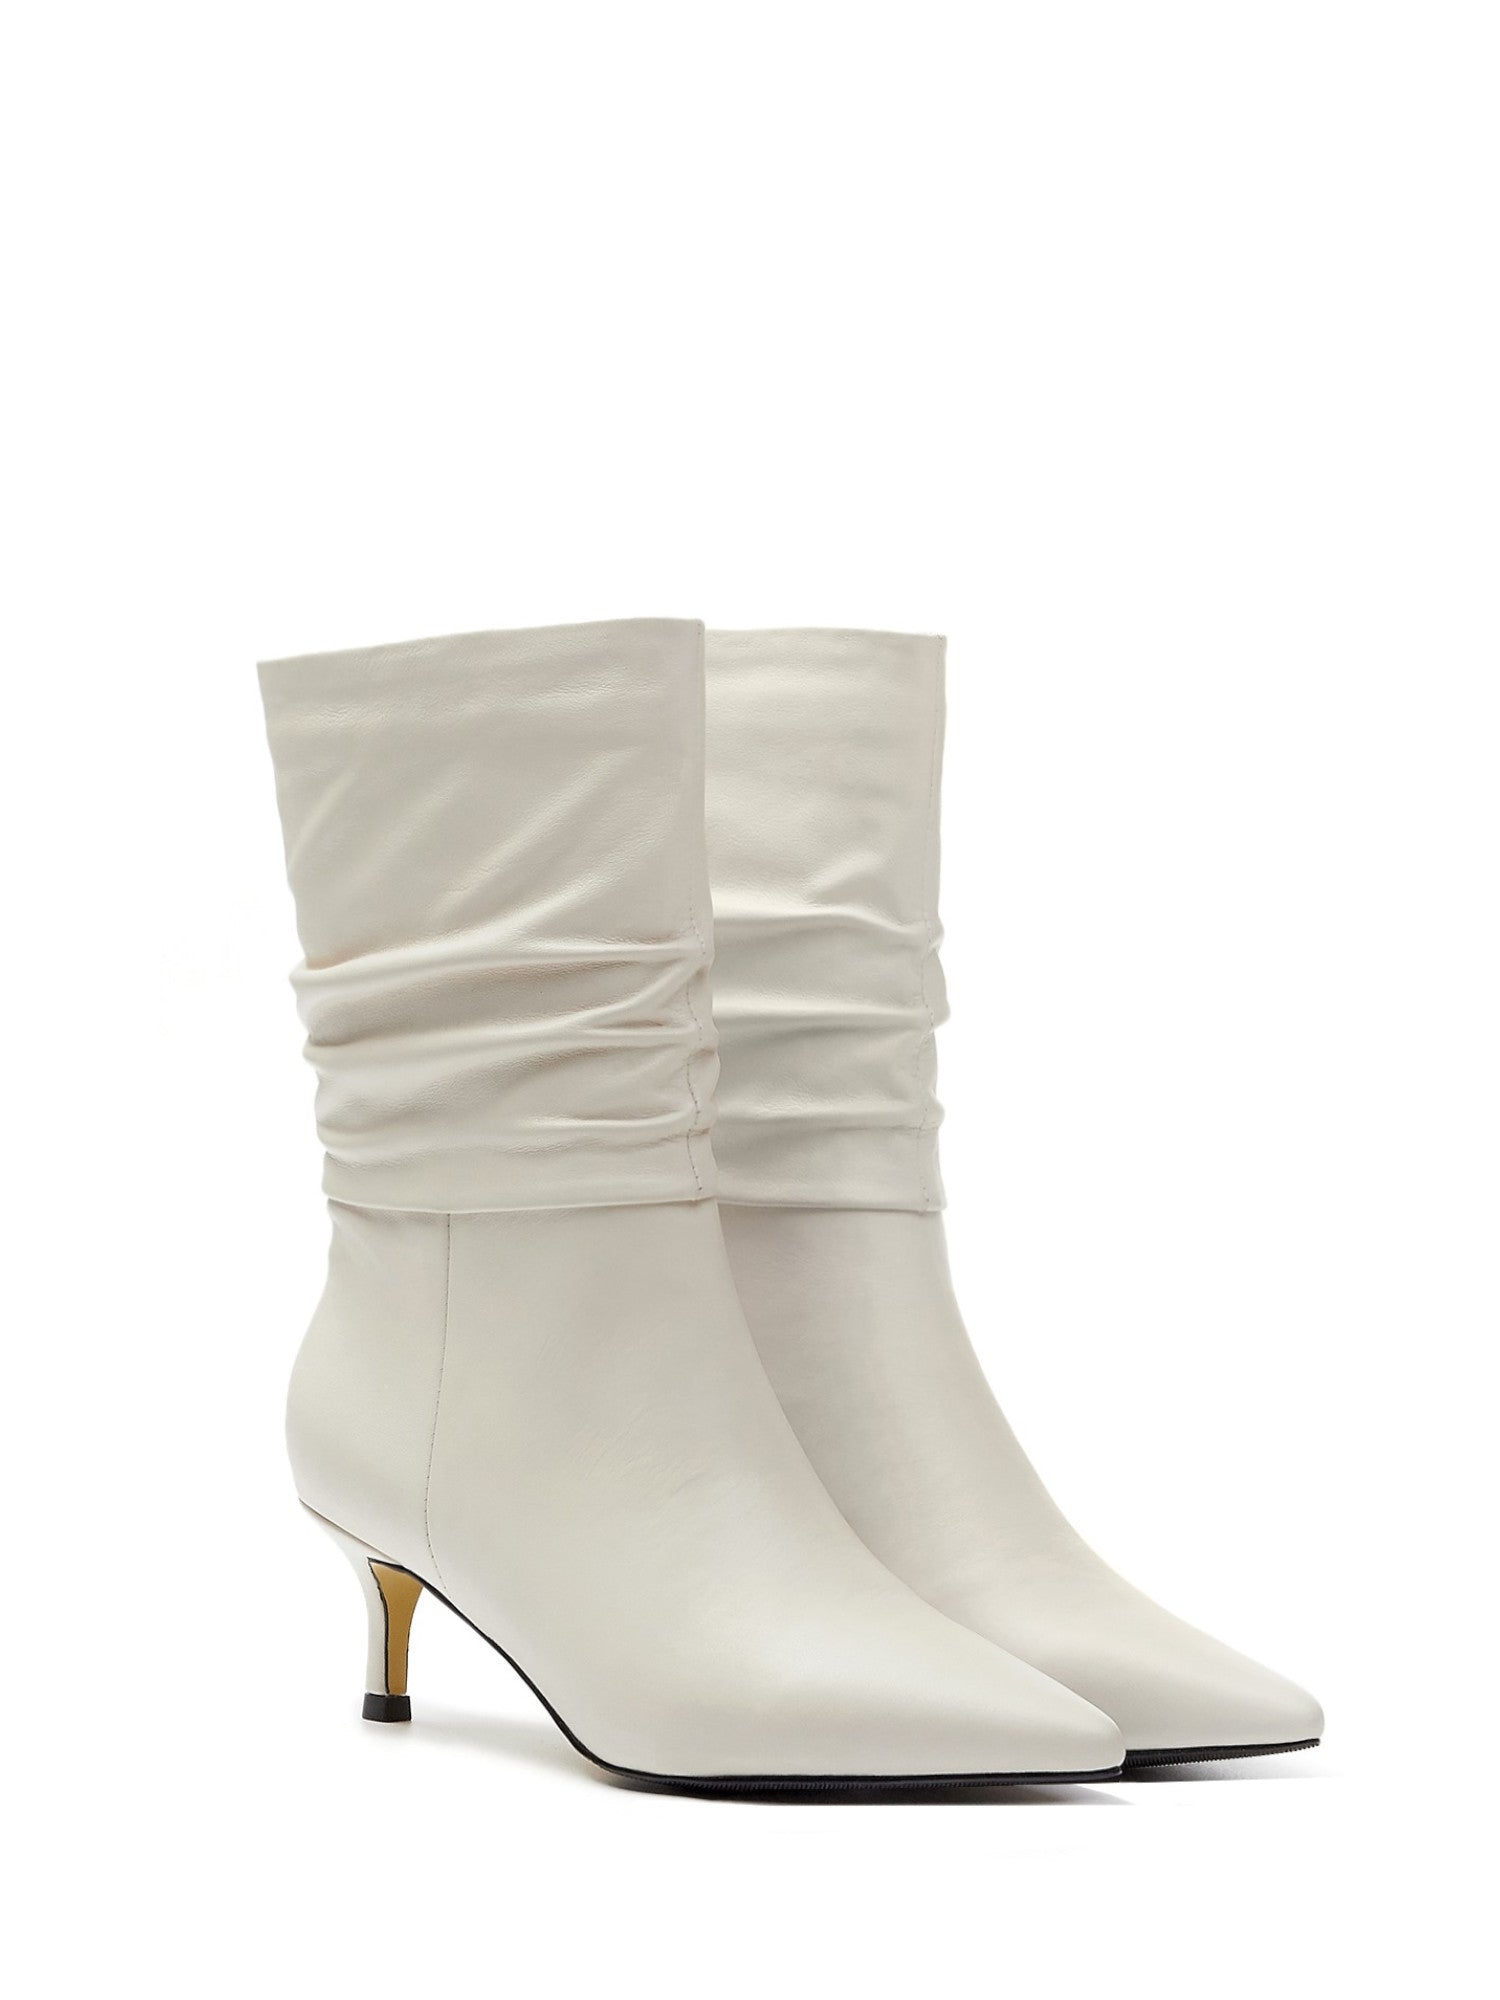 ROLISA-Milo-Slouchy-Ruched-Leather-Kitten-Heels-Mid-Calf-Boots-White-1